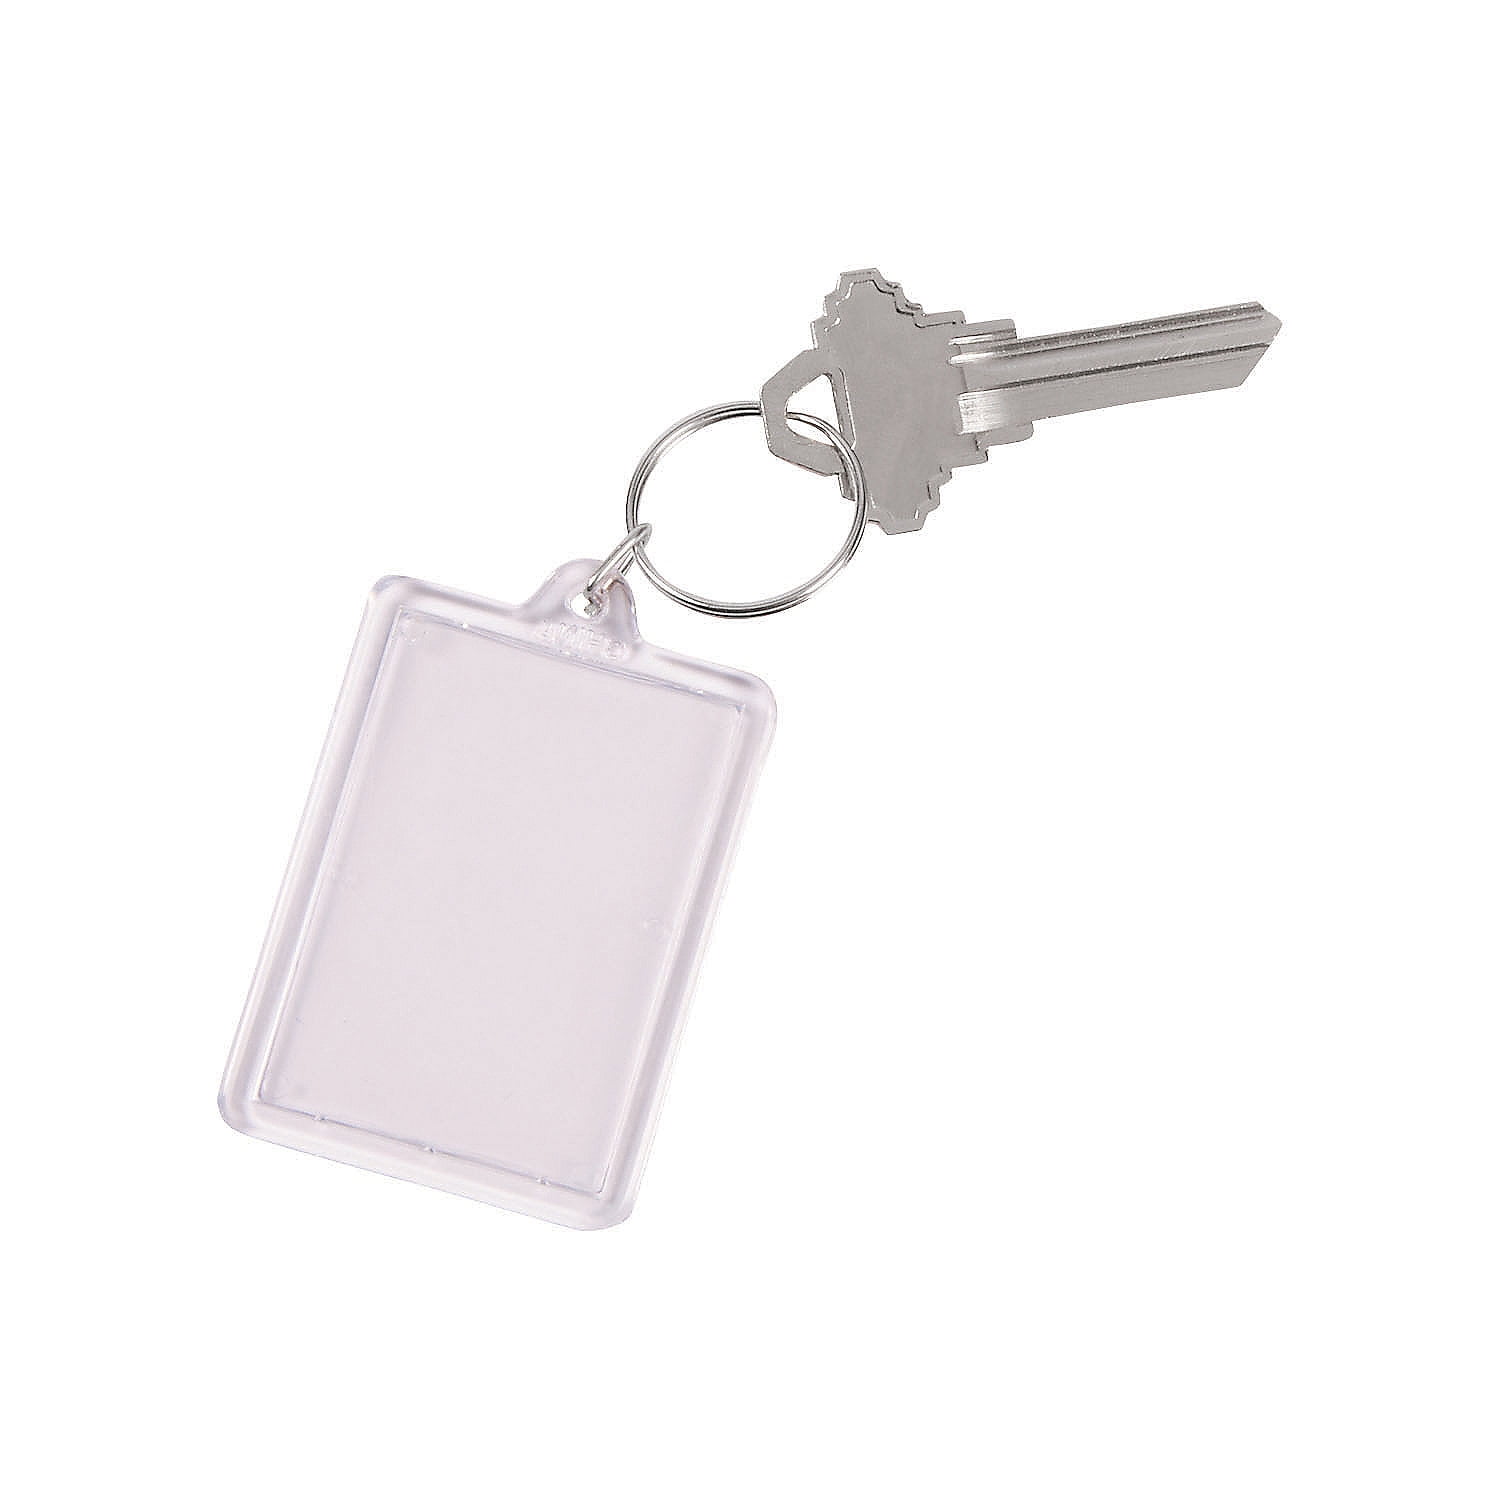 WHOLESALE 100 PHOTO FRAME KEYCHAINS KEY CHAIN CLEAR TRANSPARENT INSERT PICTURE 